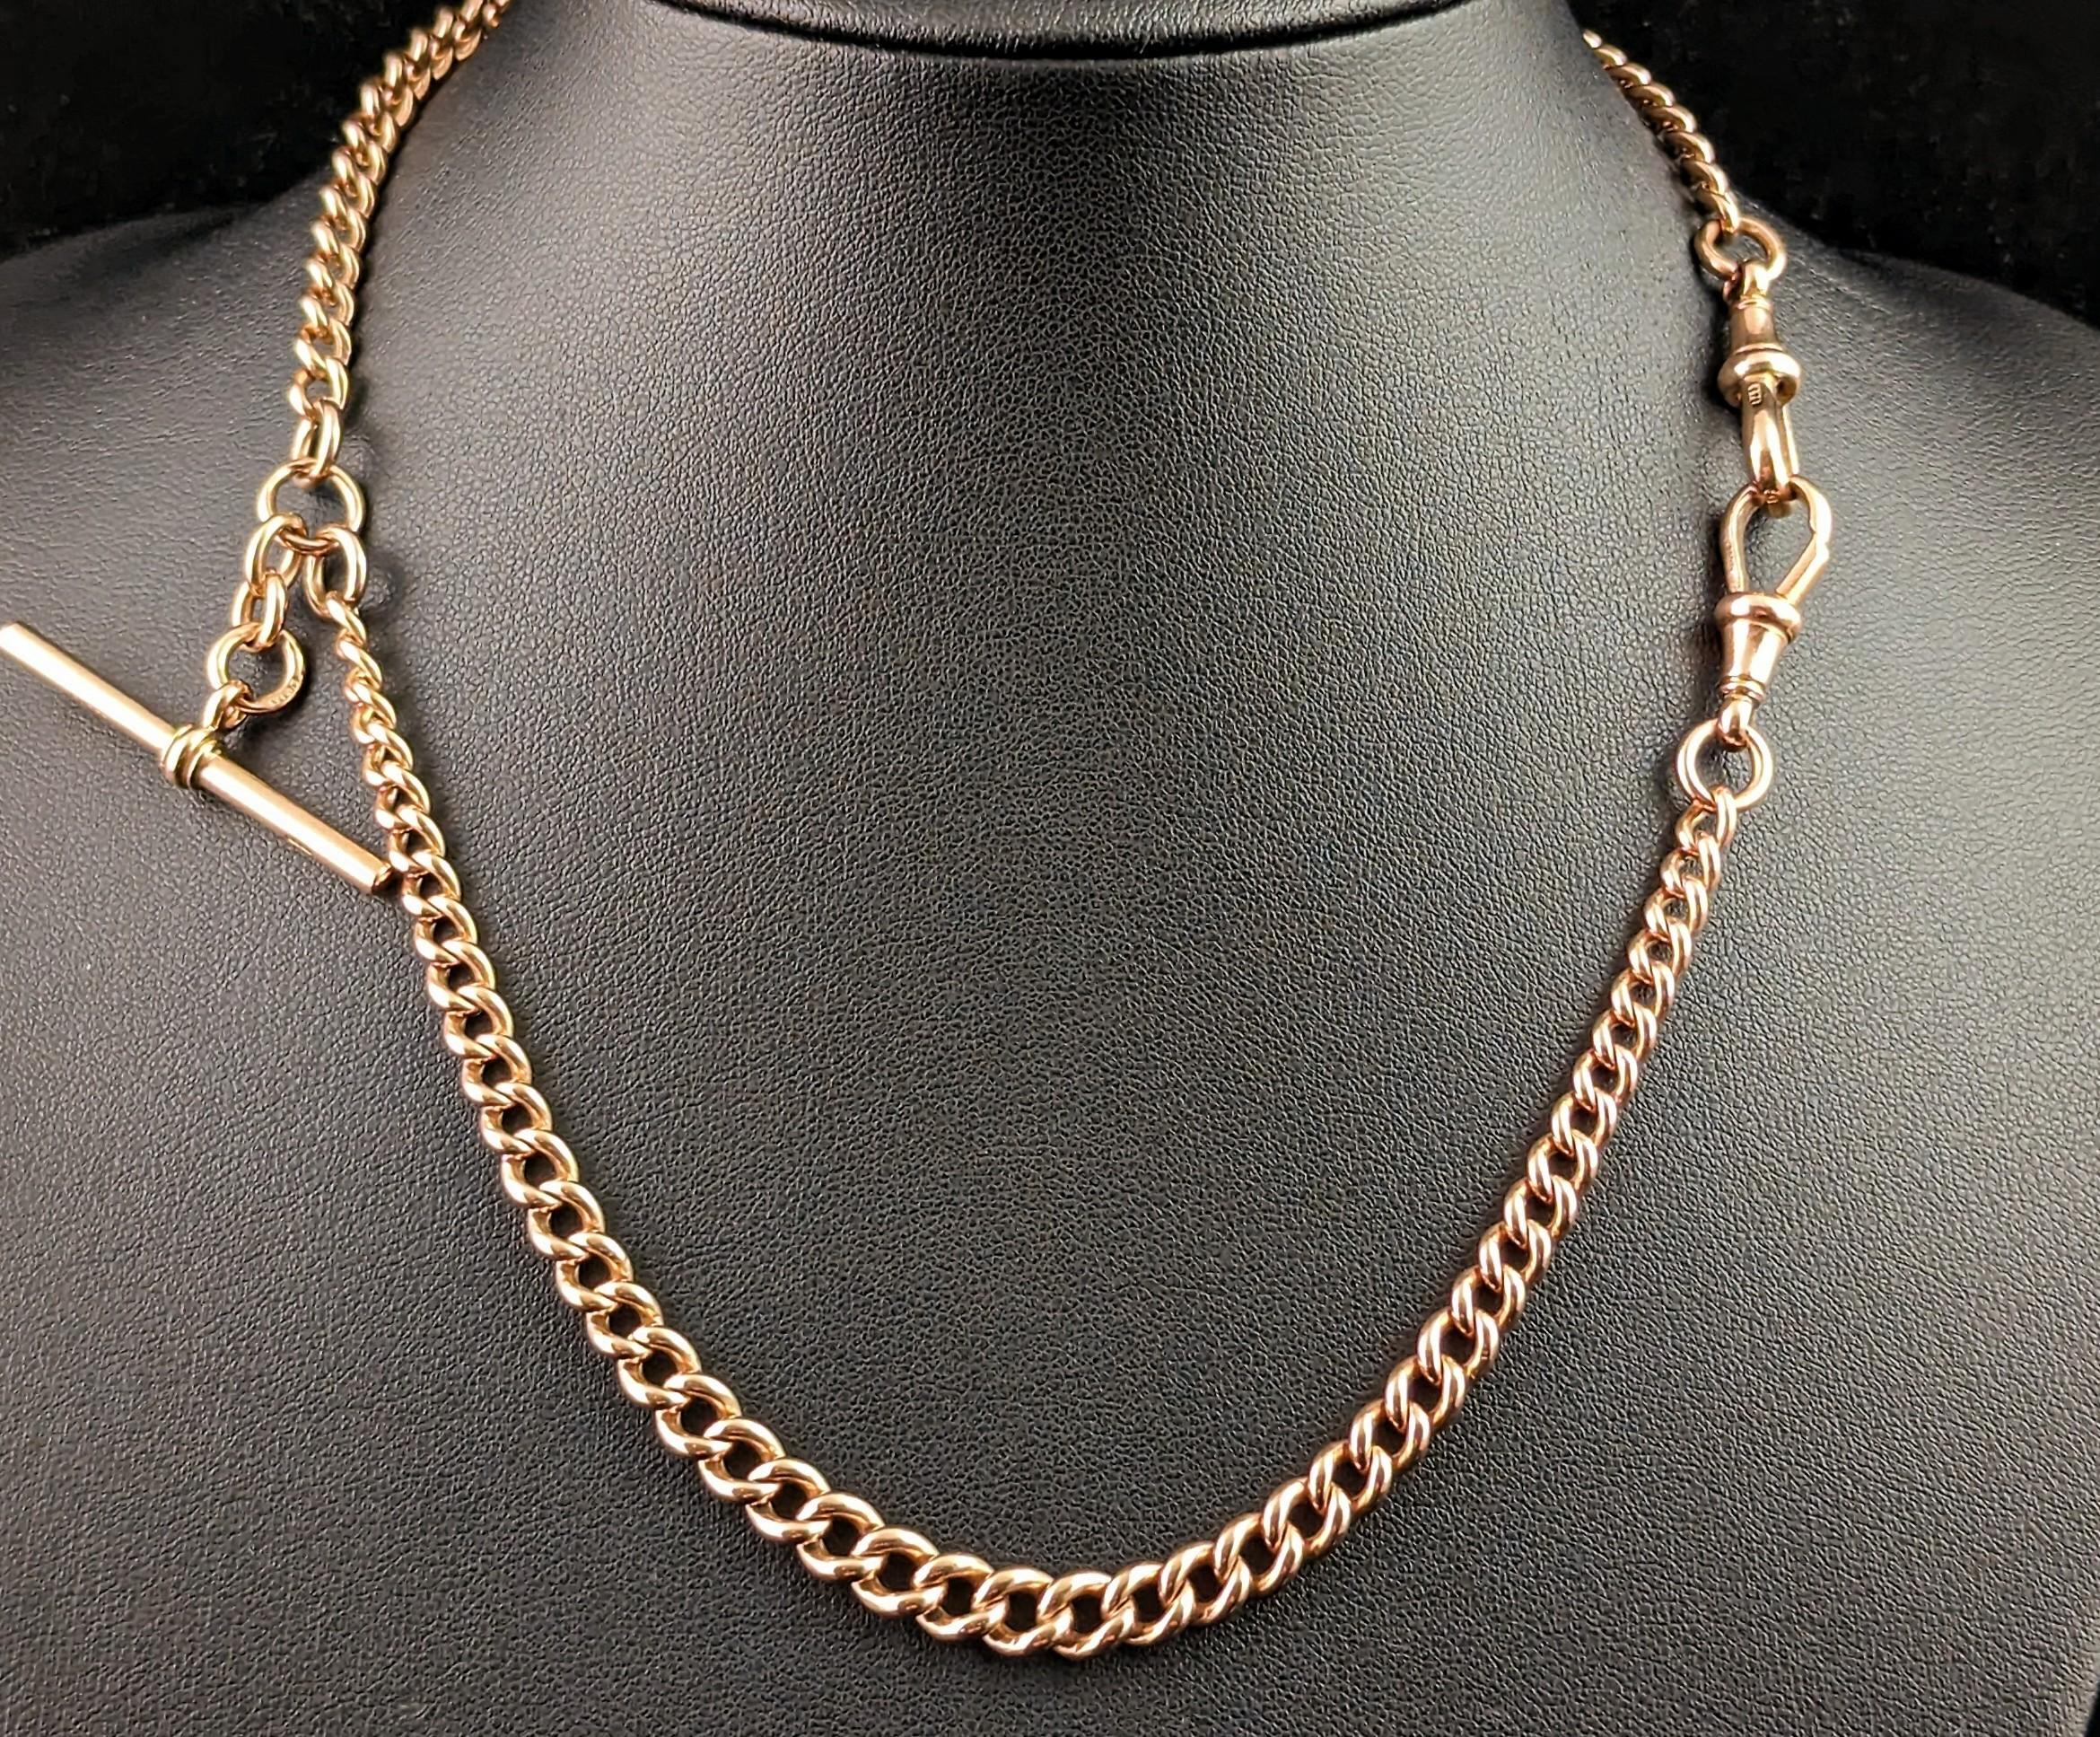 Oh this is such a handsome antique 9kt Rose gold Albert chain!

We love a good Albert chain here at StolenAttic and this beauty is no exception, lovely rich old gold tones, a nice heavy weight, a good wearable length.

It is a curb link chain in 9kt